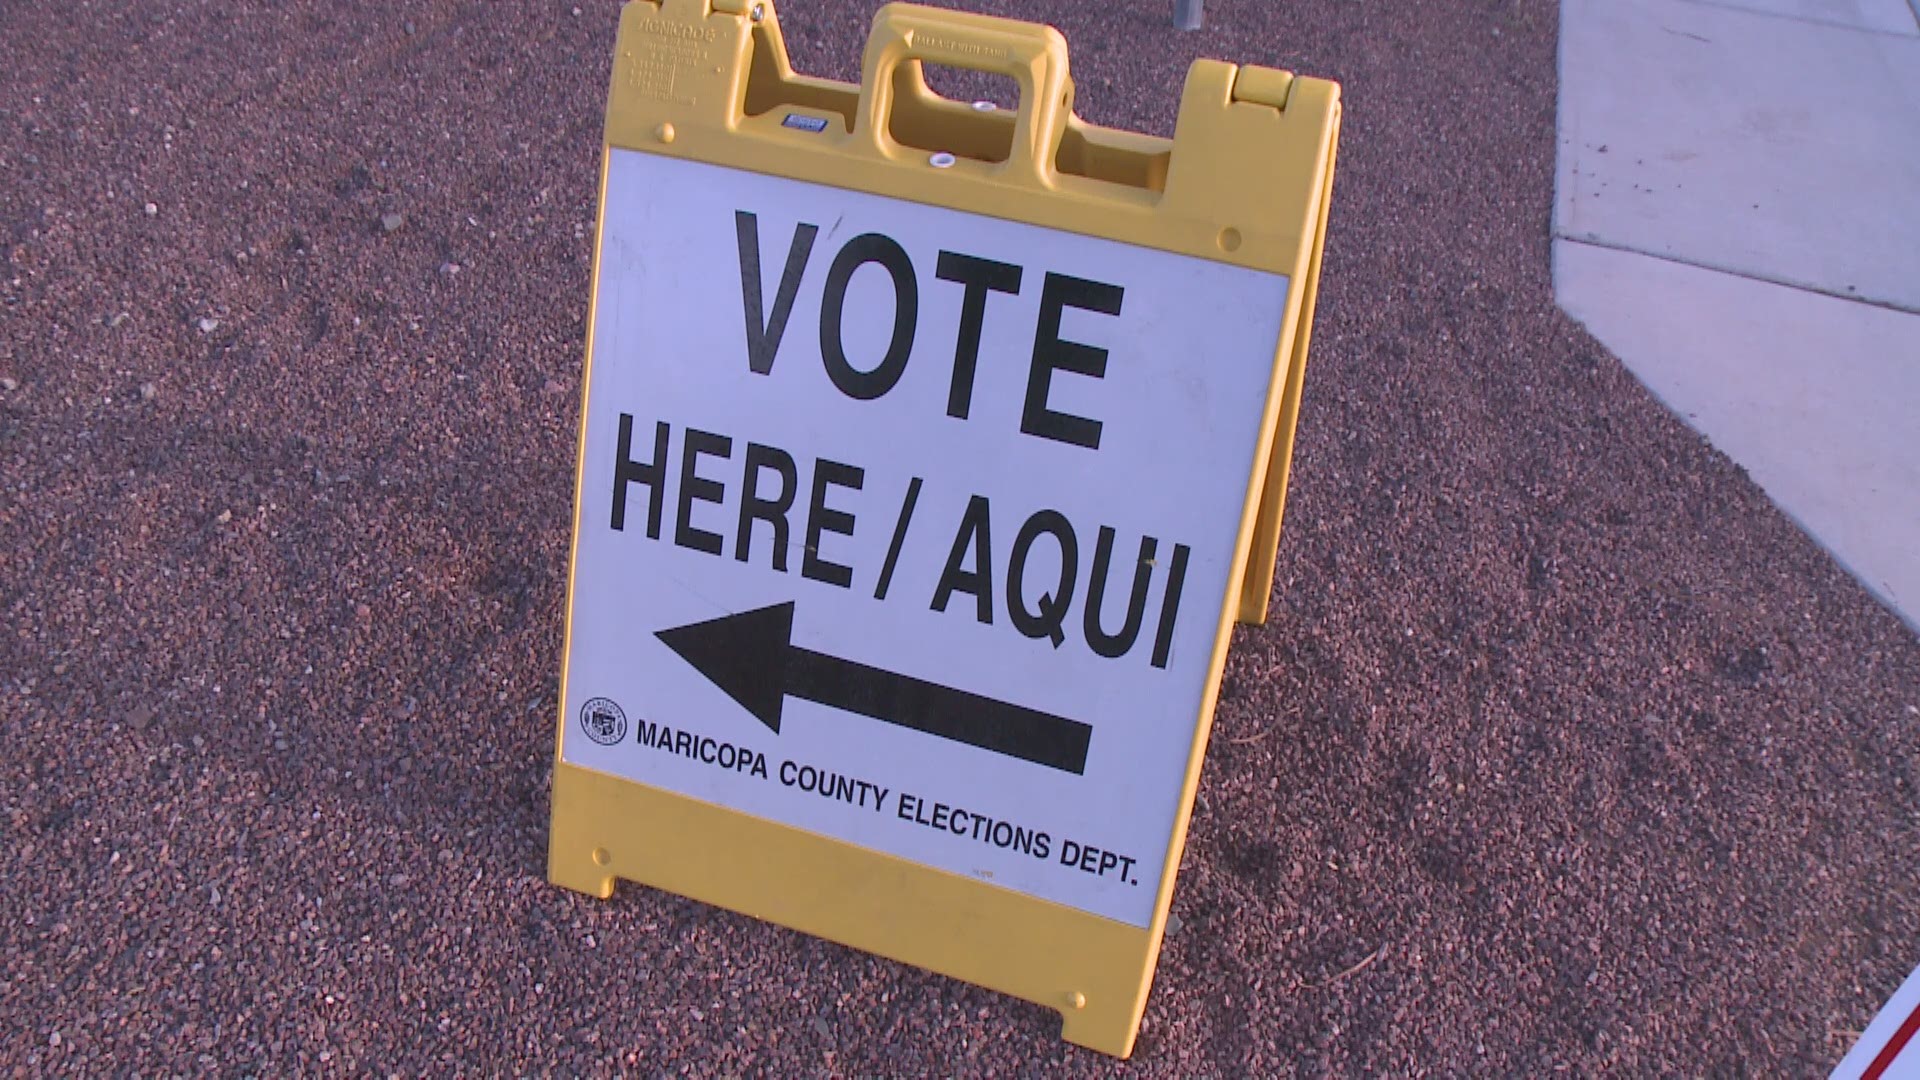 Several voters speak to 12 News about early morning delays at Maricopa County polling locations due to electronic issues.